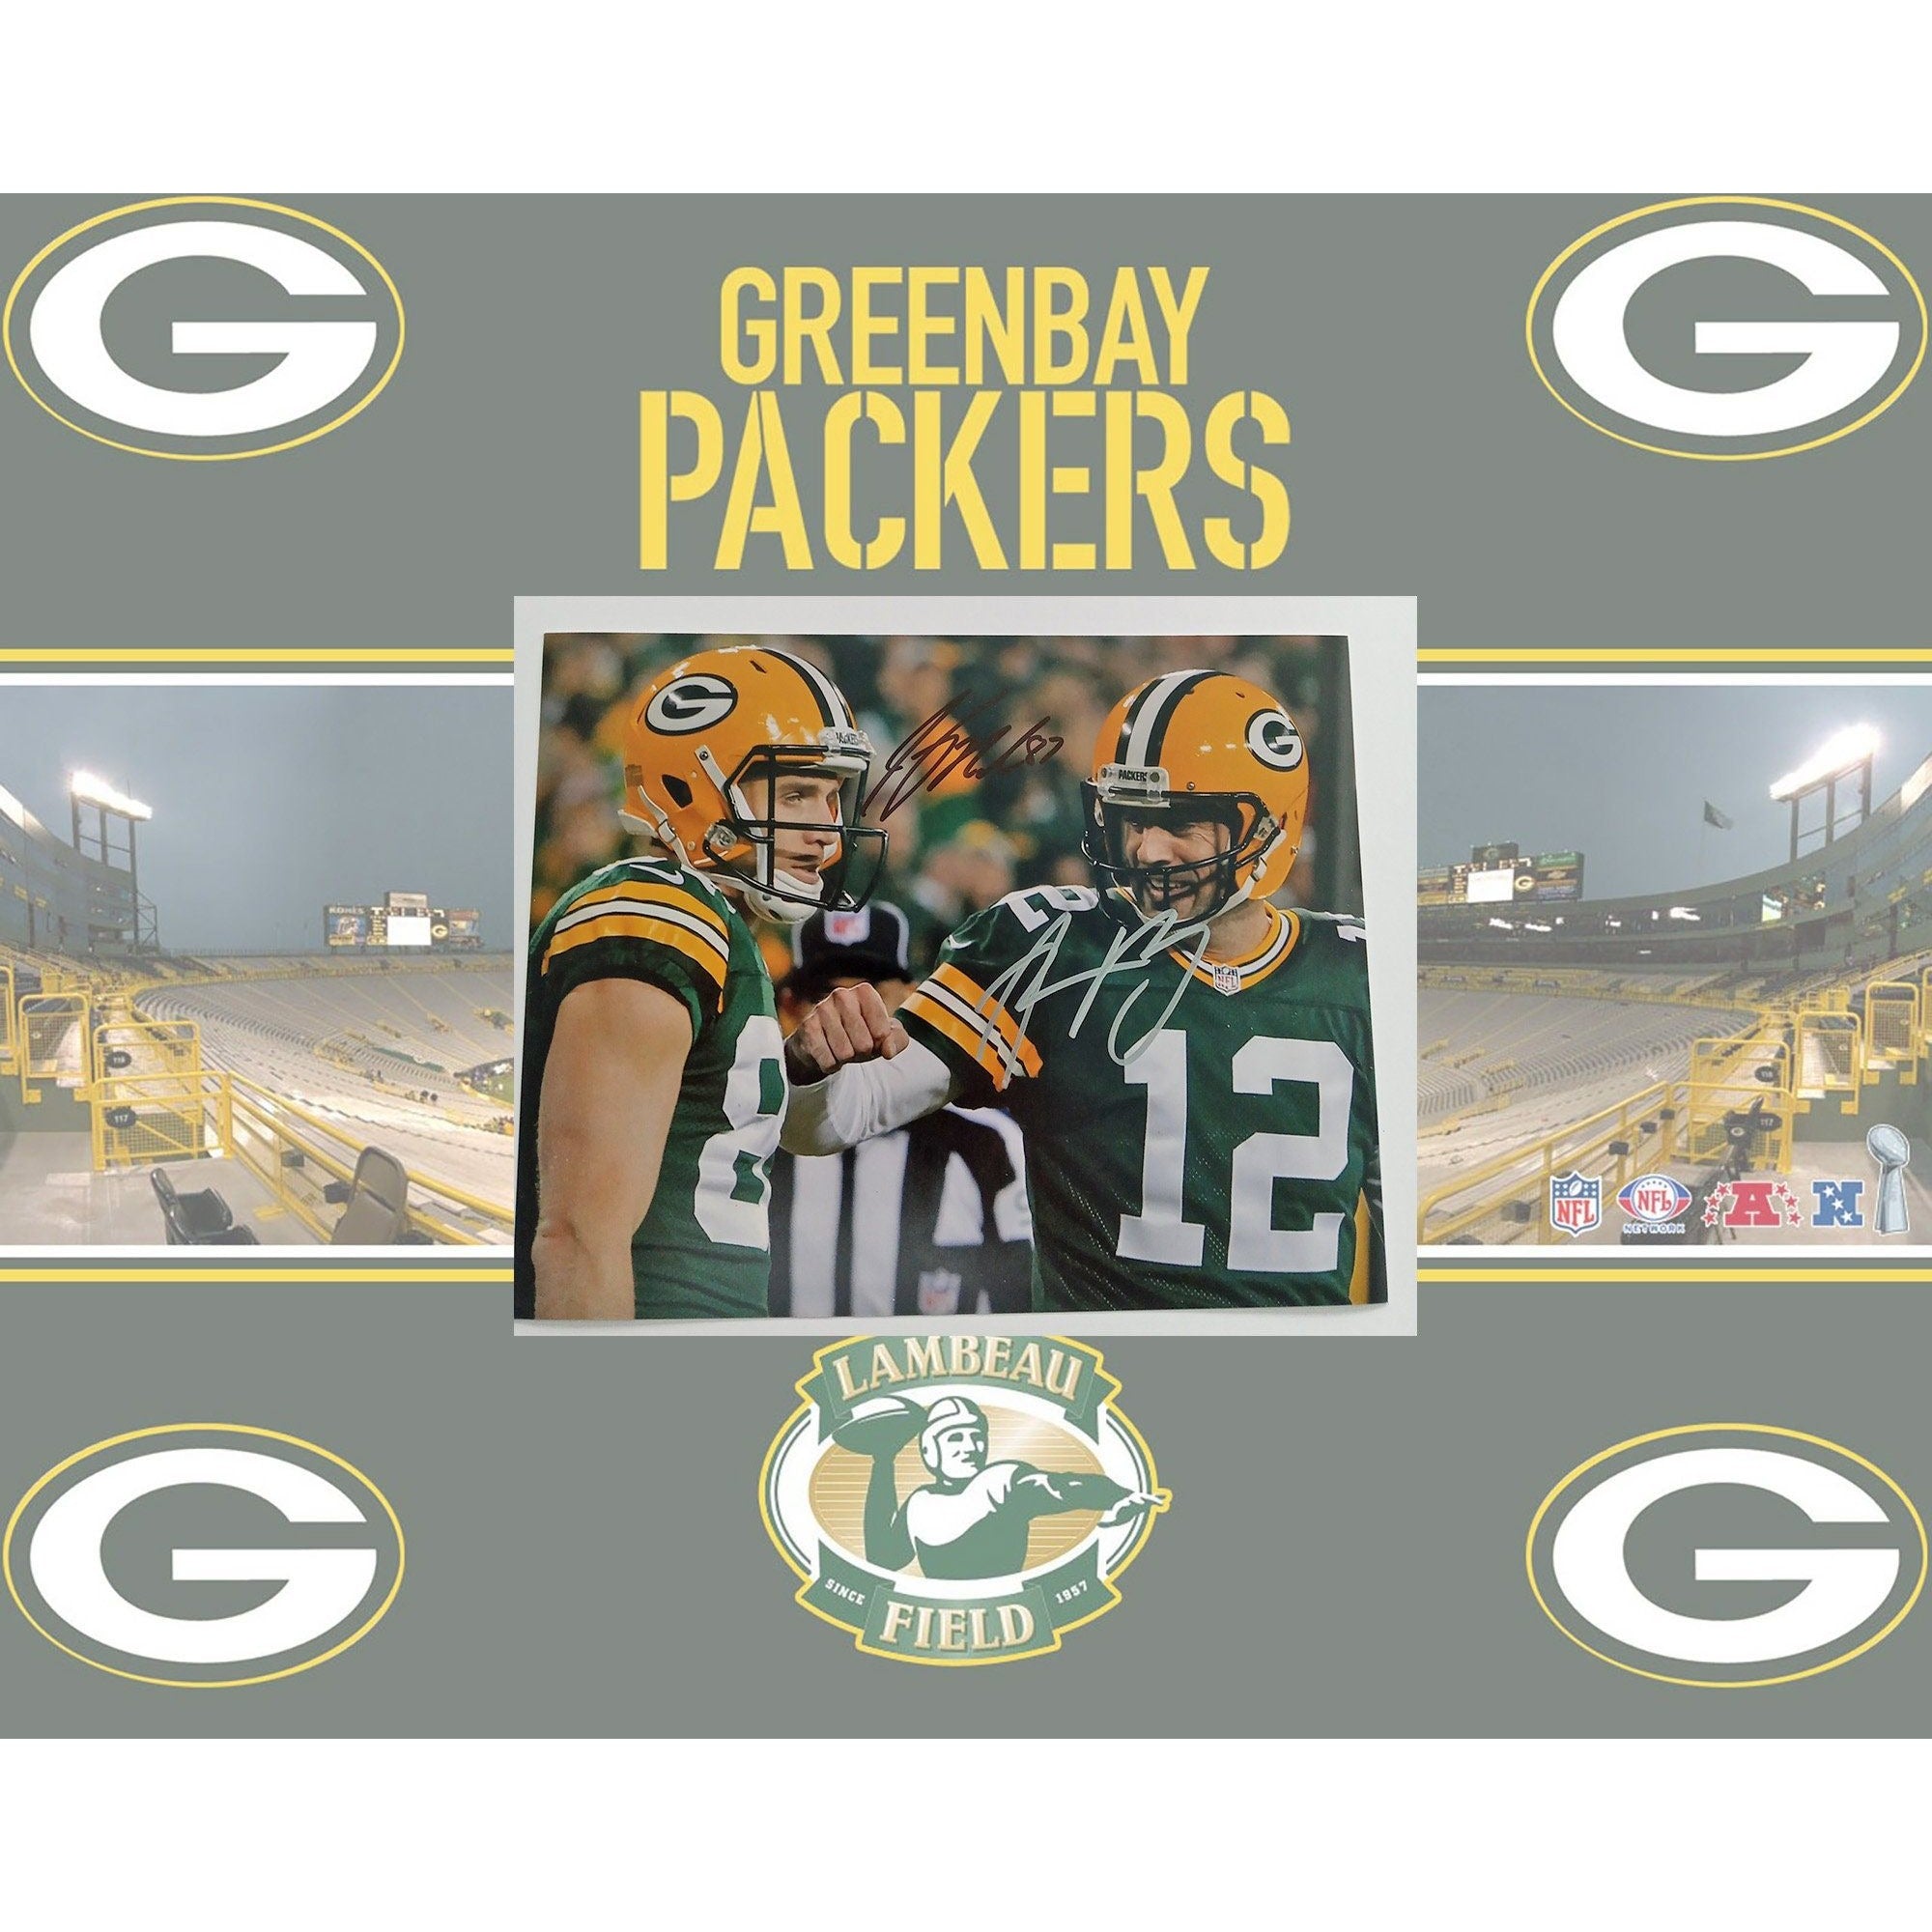 Green Bay Packers Aaron Rodgers and Jordy Nelson 8 by 10 signed photo with proof